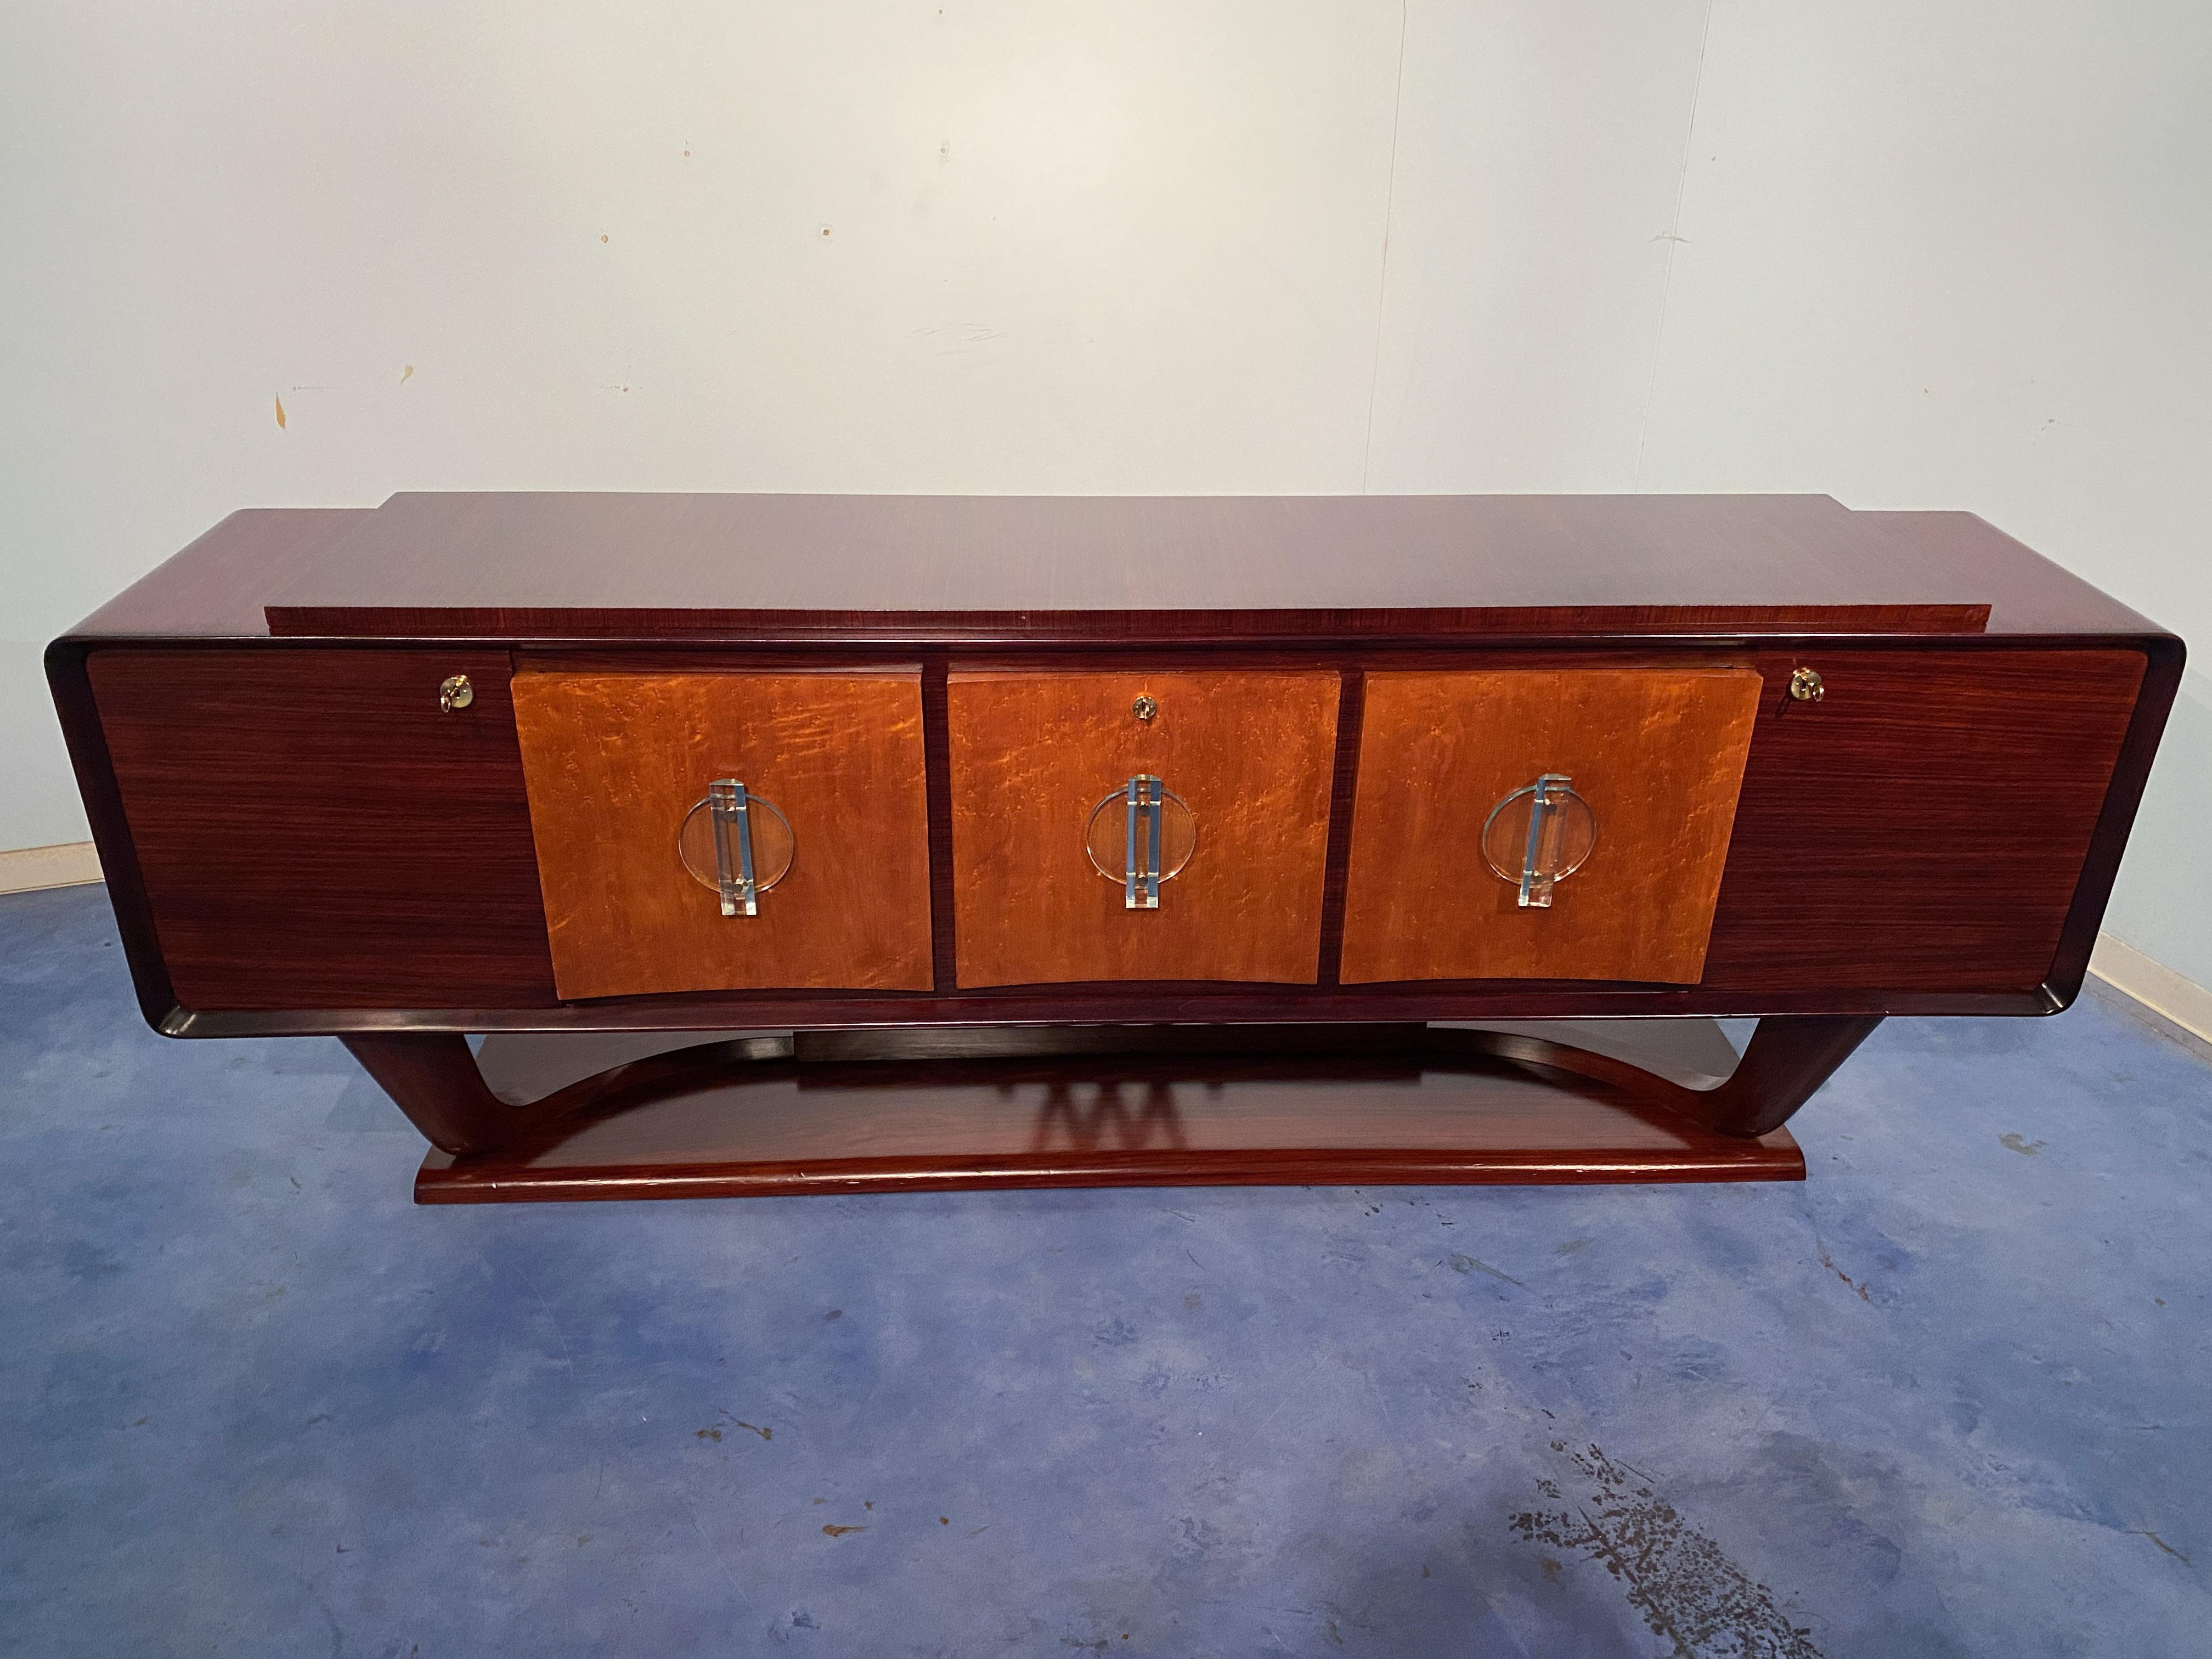 Italian Art Deco Sideboard with Bar Cabinet Attributed to Osvaldo Borsani, 1940s For Sale 5